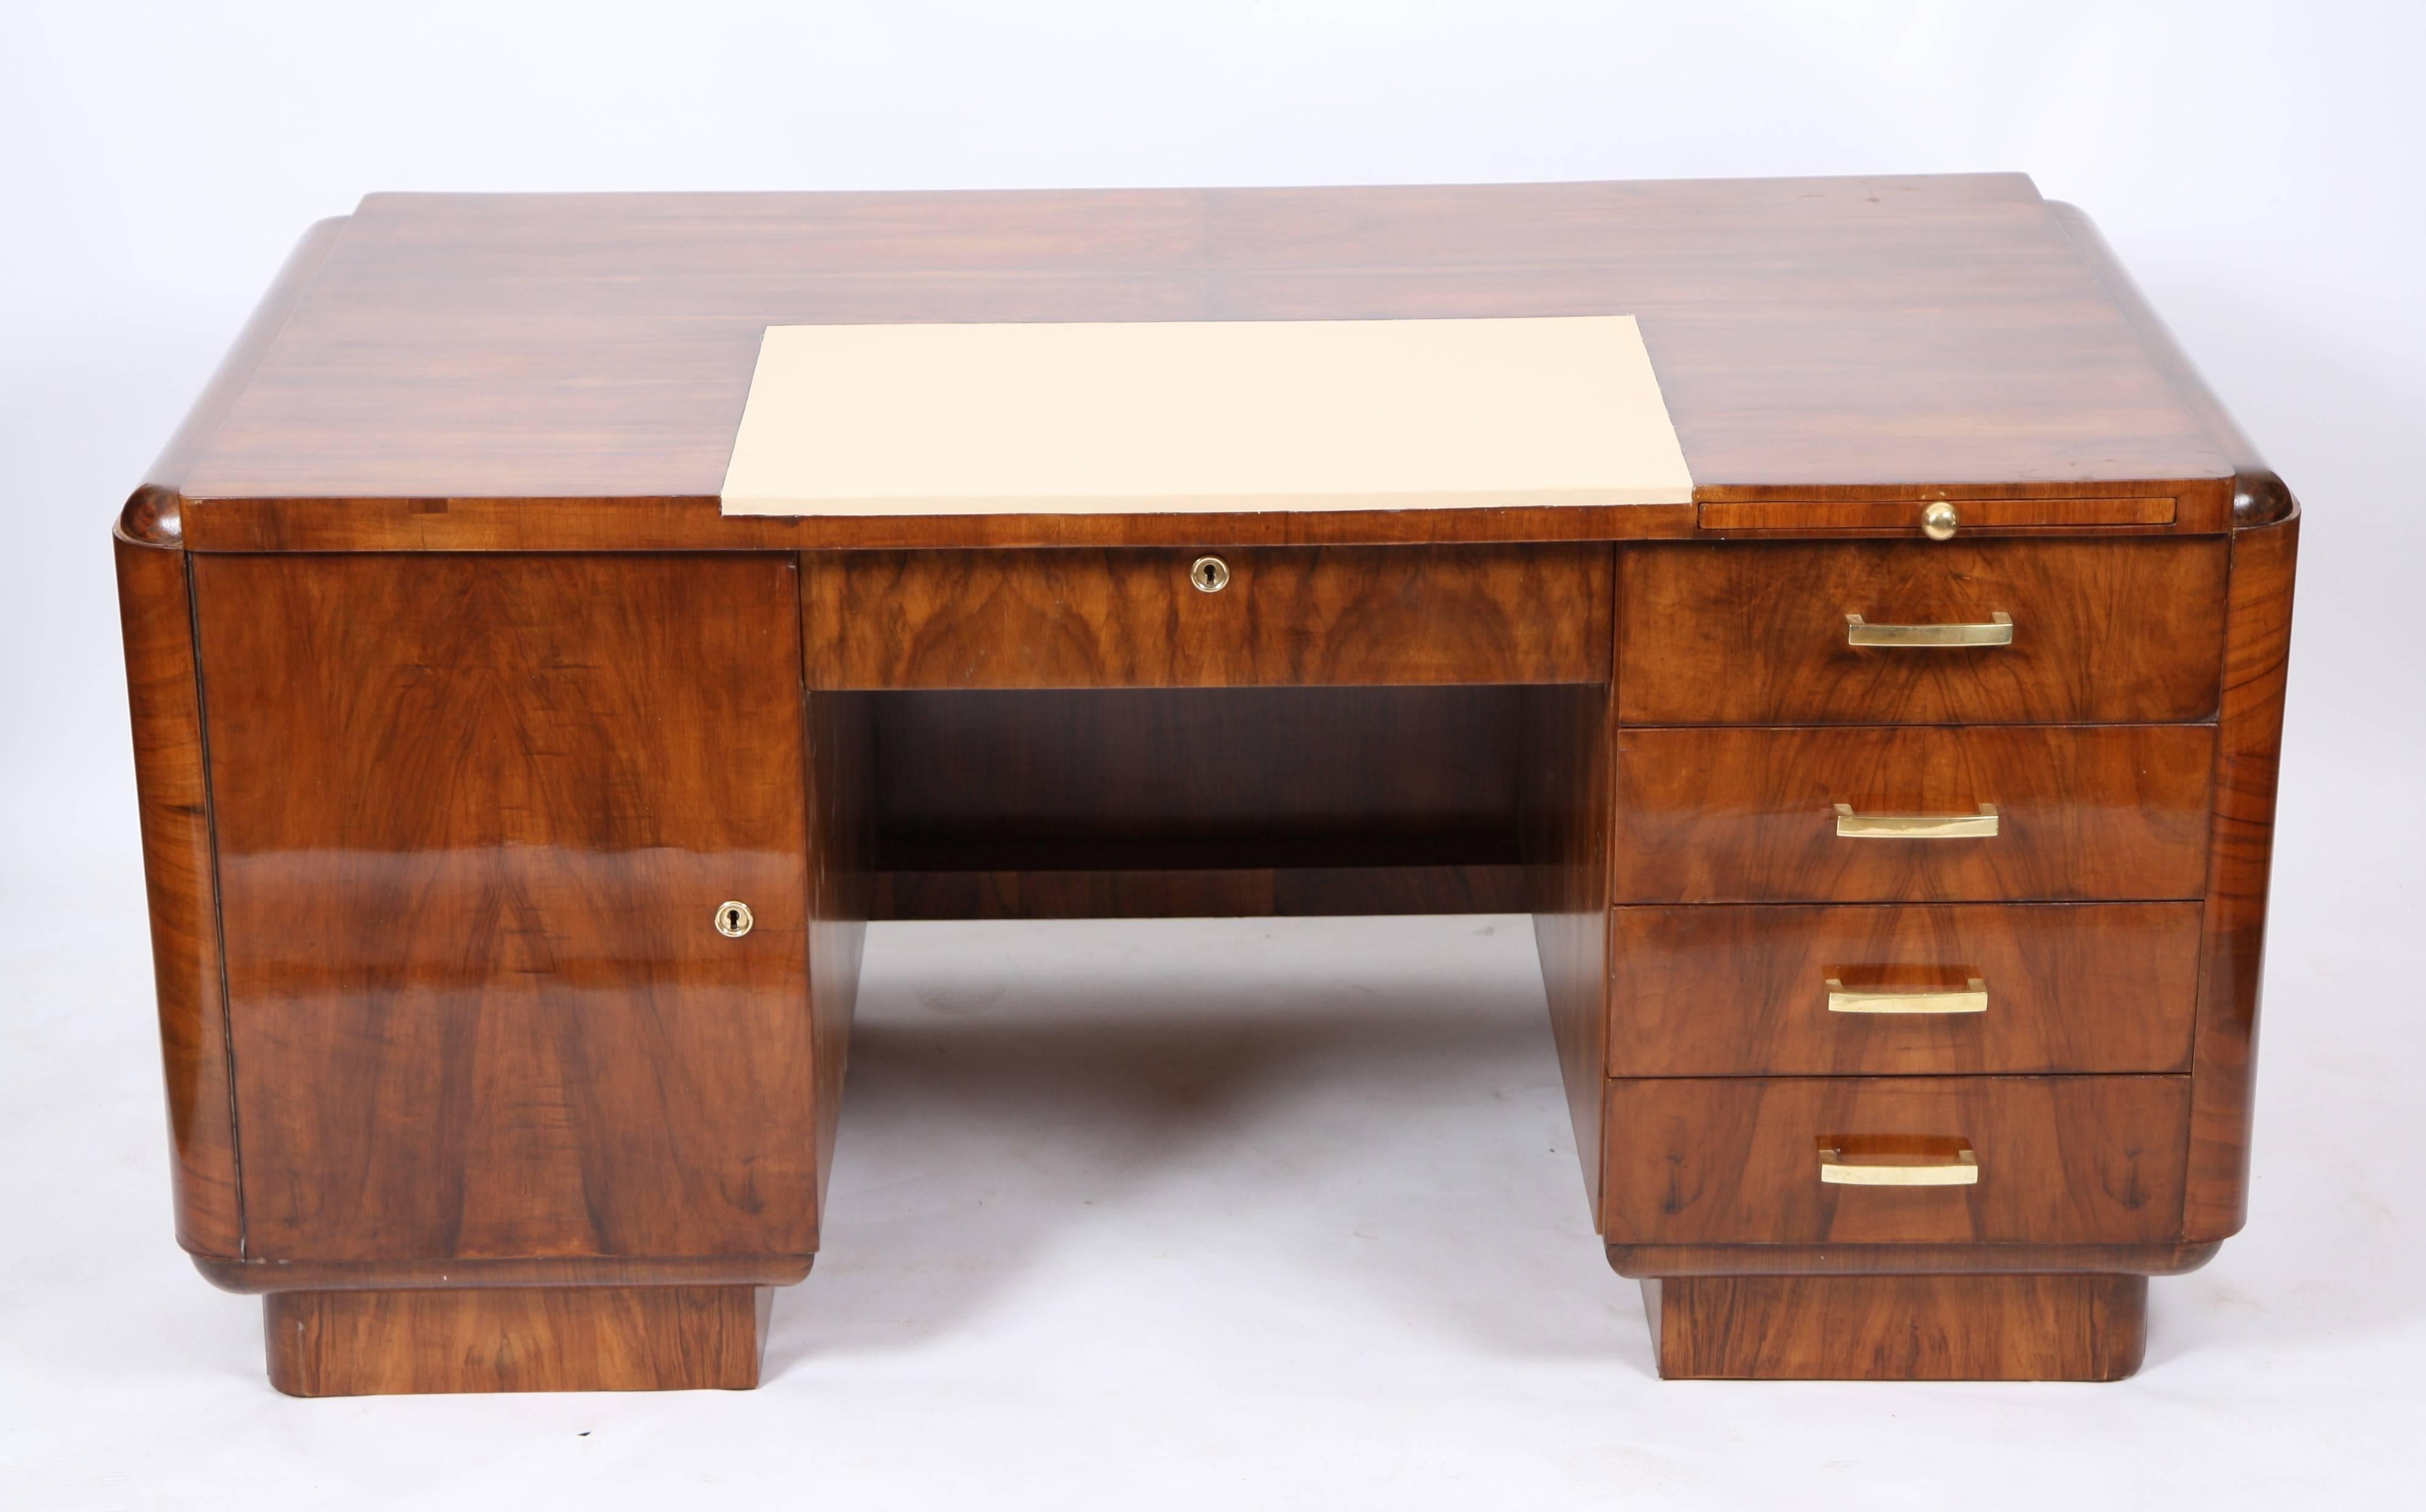 Office desk Art Deco
In walnut and walnut veneer, opening a large central drawer, a door to the box left and a zipper and four drawers for the right box, above wooden part cream leather wrapped.Usual restorations and maintenance.
Era 20th century